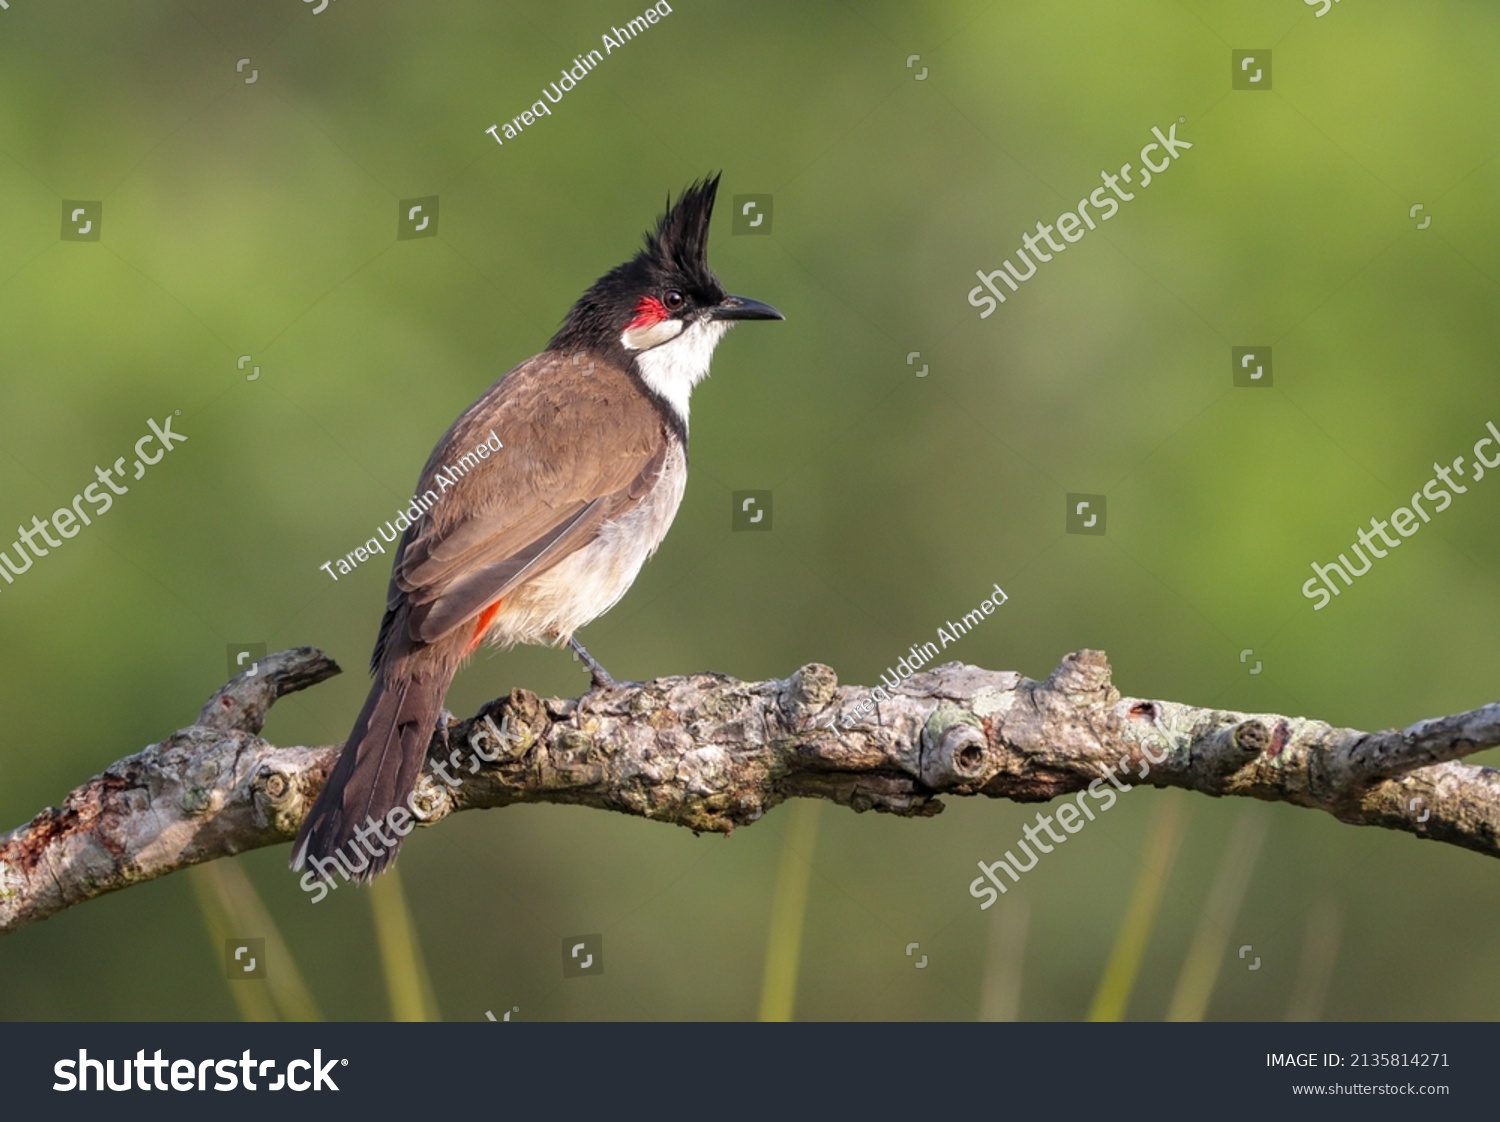 The  red-whiskered bulbul (Pycnonotus jocosus), or crested bulbul, is a passerine bird native to Asia. It is a member of the bulbul family.  #2135814271